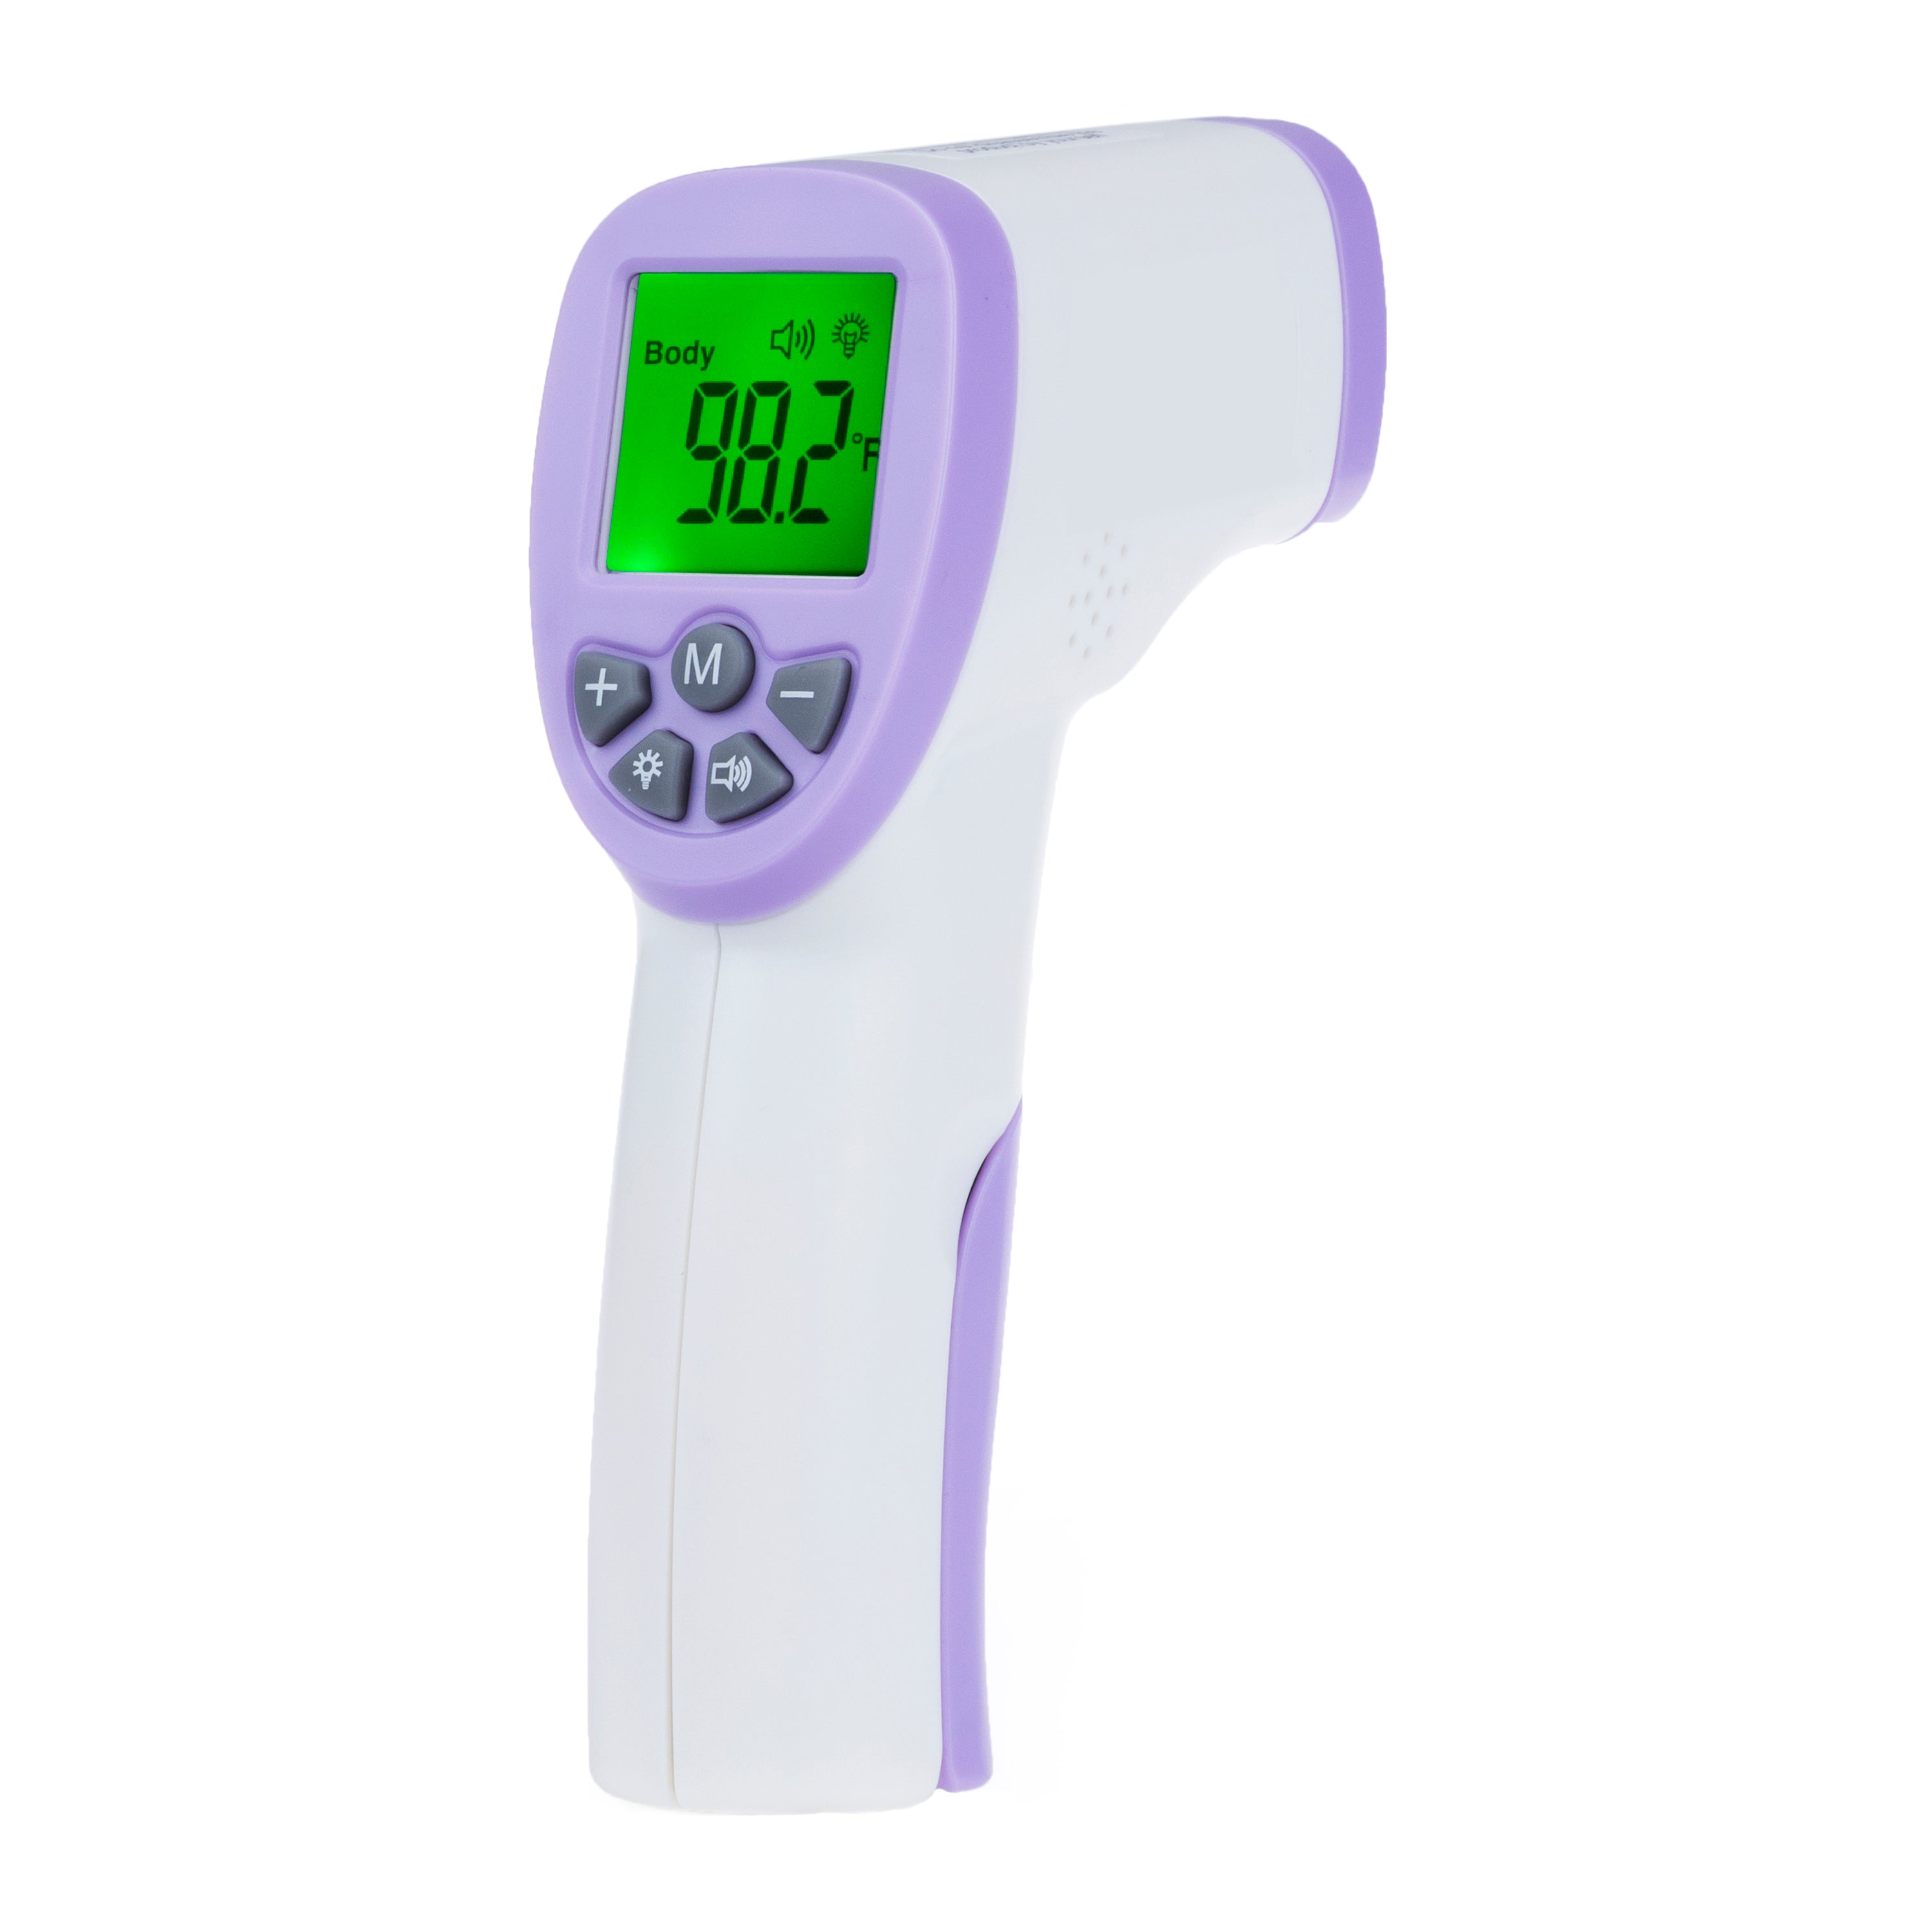 Infrared Digital Thermometer: Specifications, Features, Uses